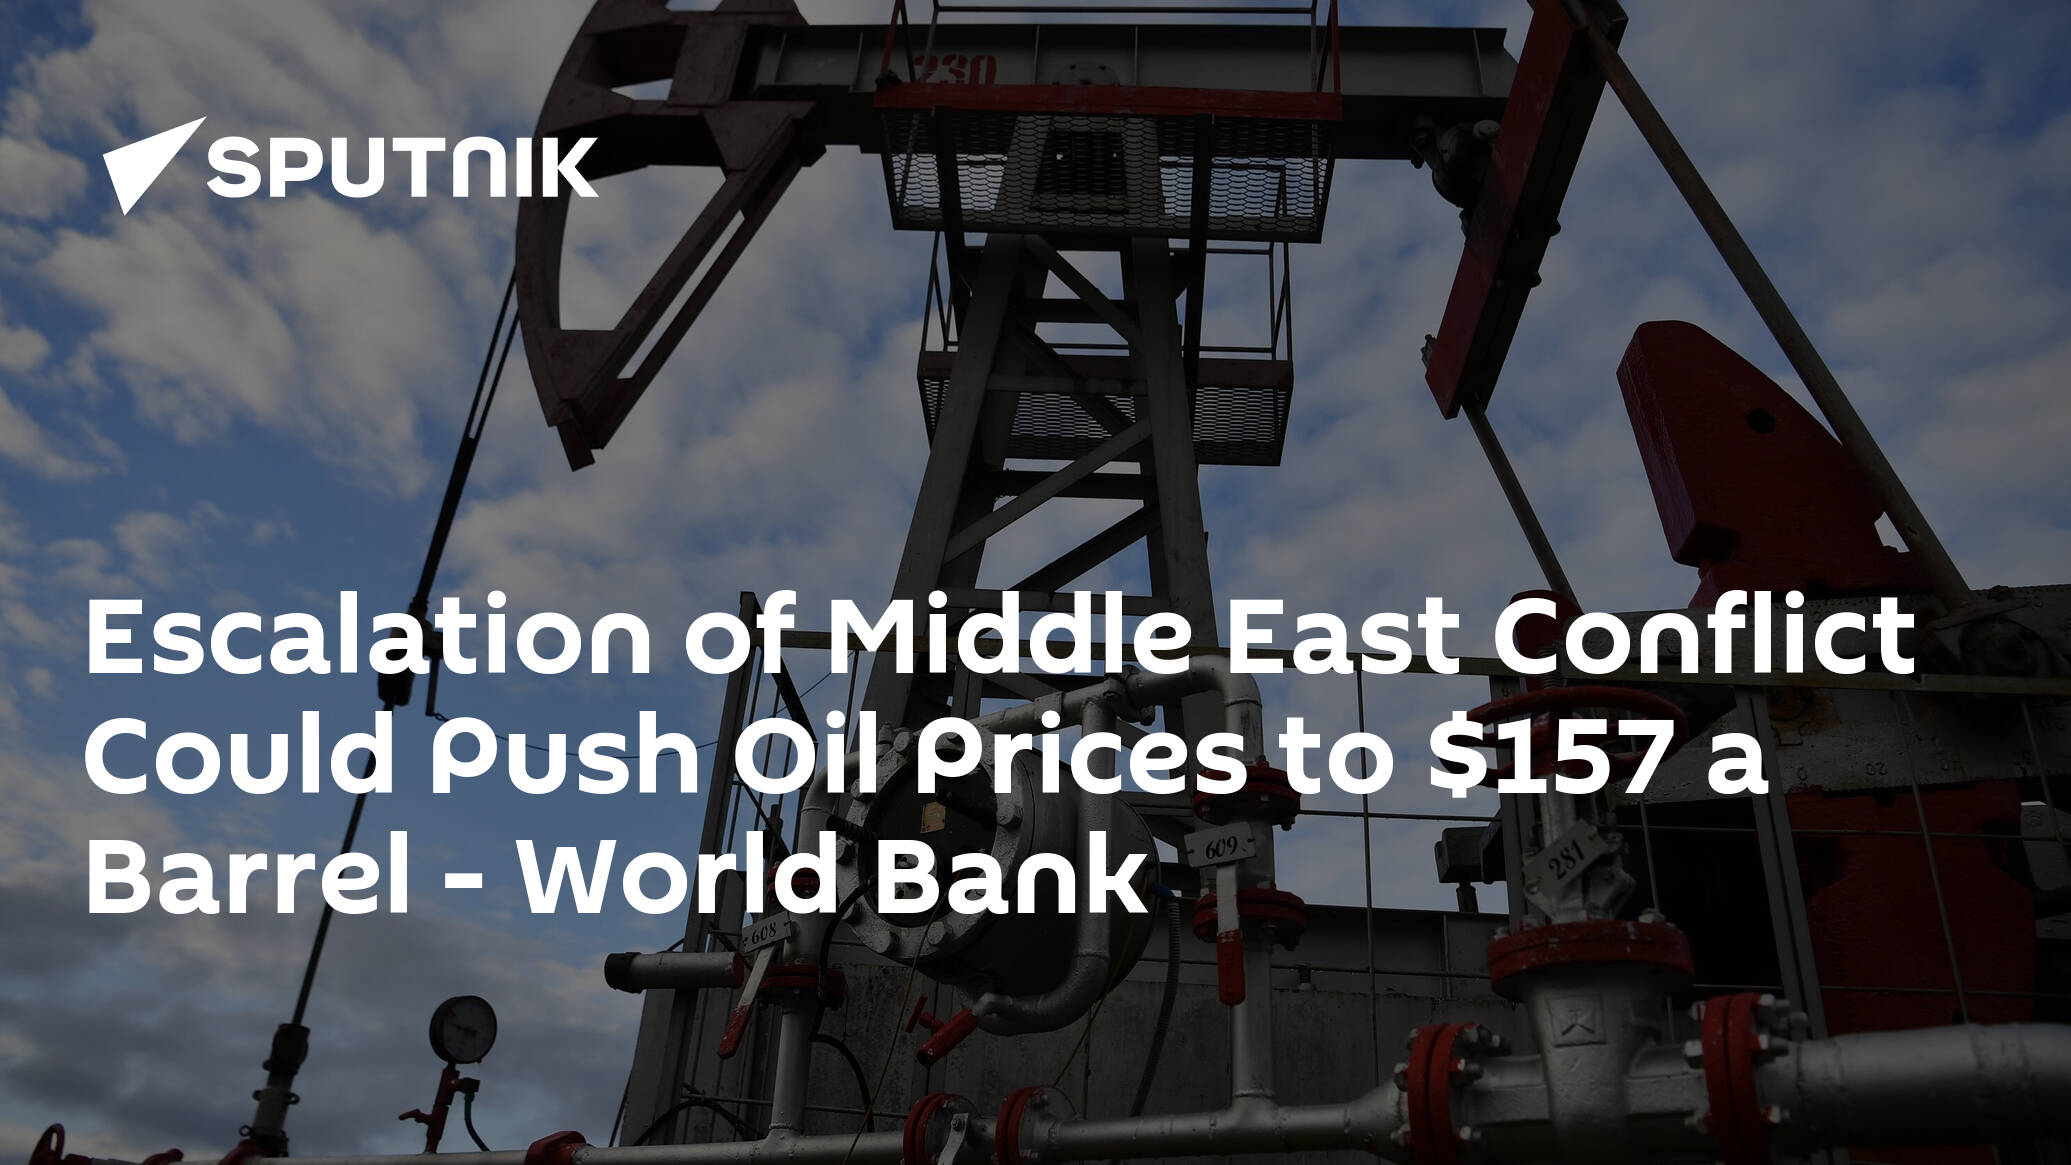 Escalation of Middle East Conflict Could Push Oil Prices to 7 a Barrel – World Bank